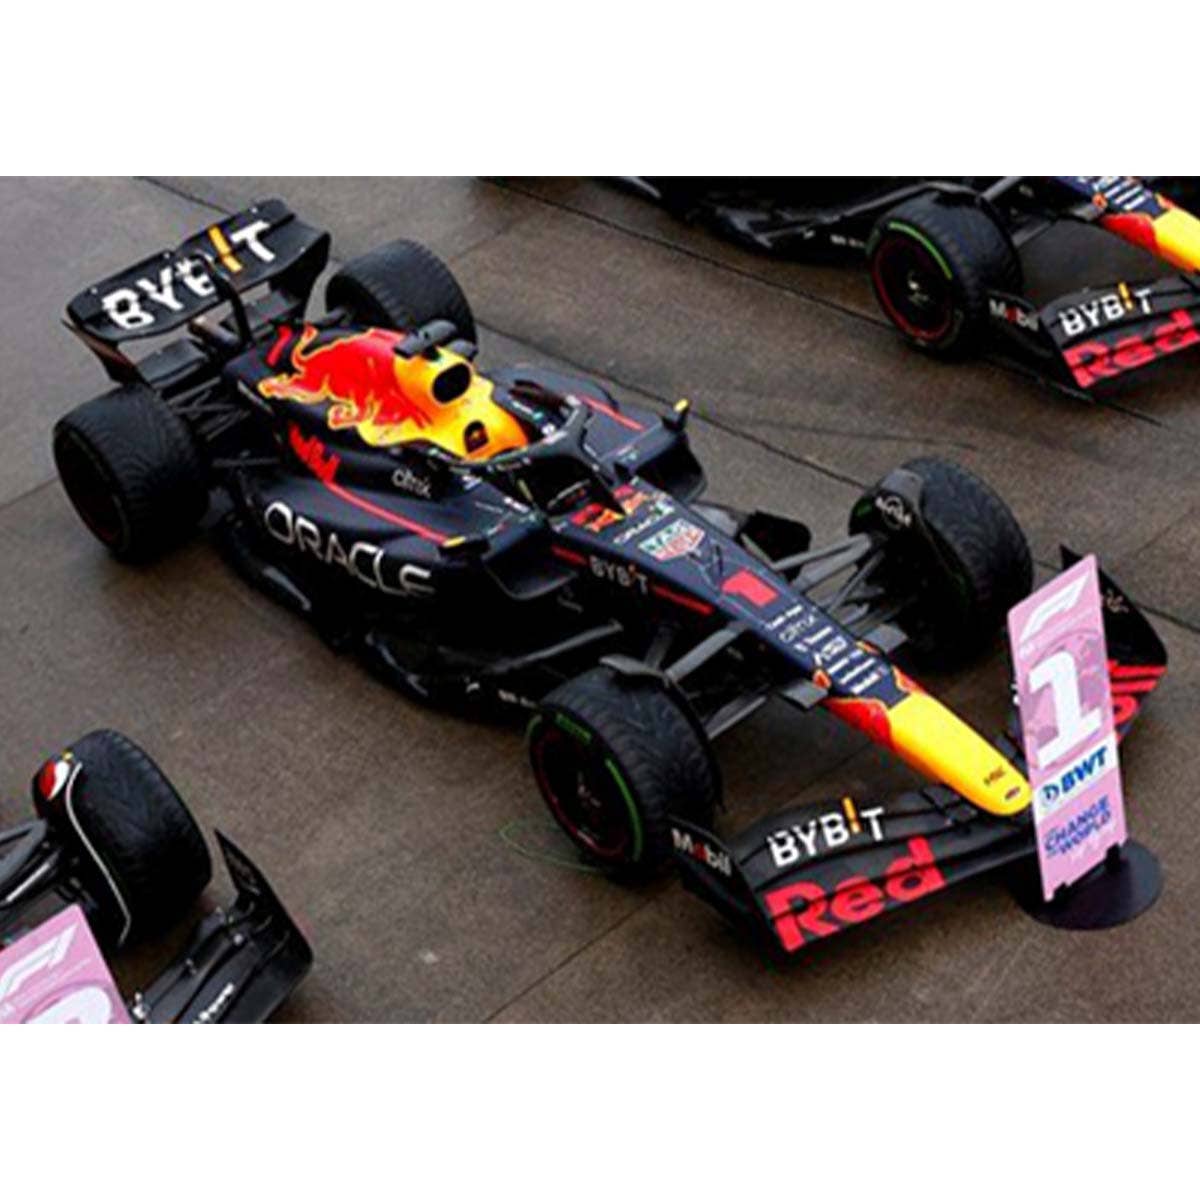 Oracle Red Bull Racing RB18 No.1 - Winner Japanese GP 2022 - 2022 Formula One Drivers' Champion - Max Verstappen.  With No.1 and World Champion Board - 1:43 Scale Resin Model Car